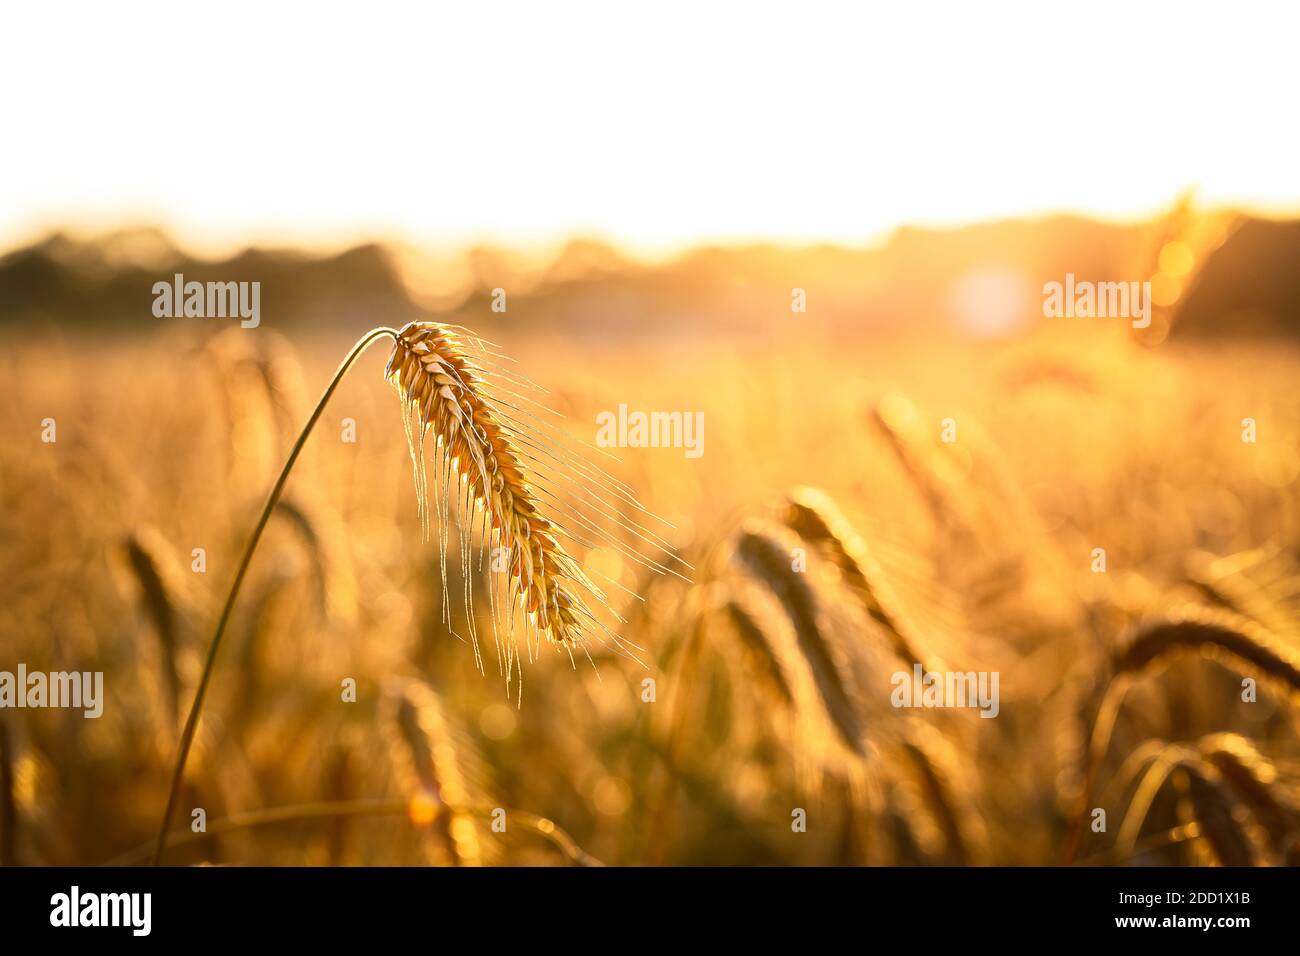 A grain field on a sunny day in eastfrisia, lokally named Ostfriesland Stock Photo